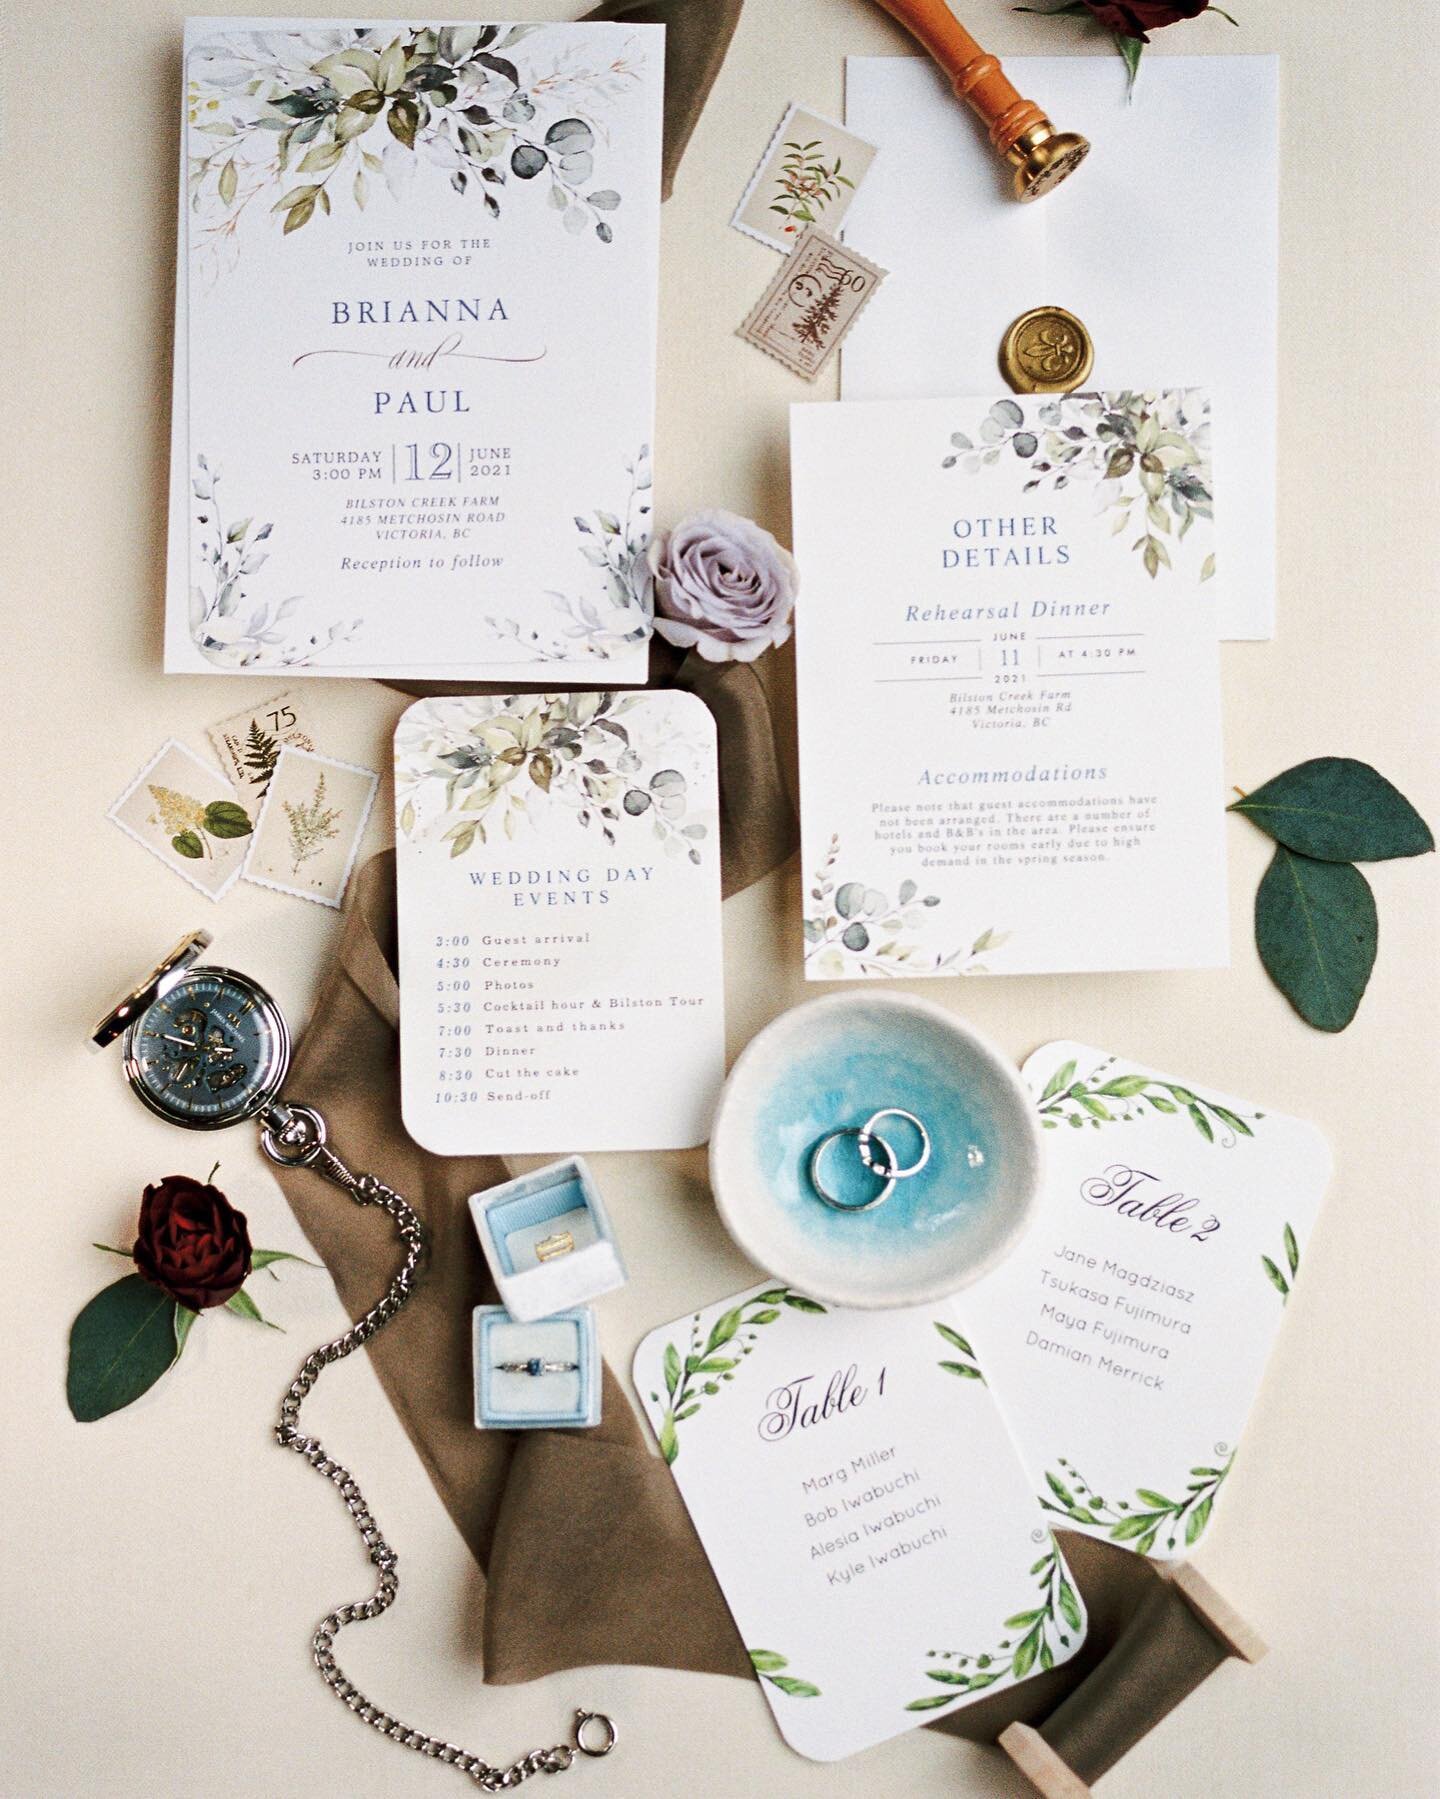 The flatlay of the wedding invitations, and all your little details is one of my favorites. It may seem unnecessary at the time, but years later this image will evoke so many memories of your day.